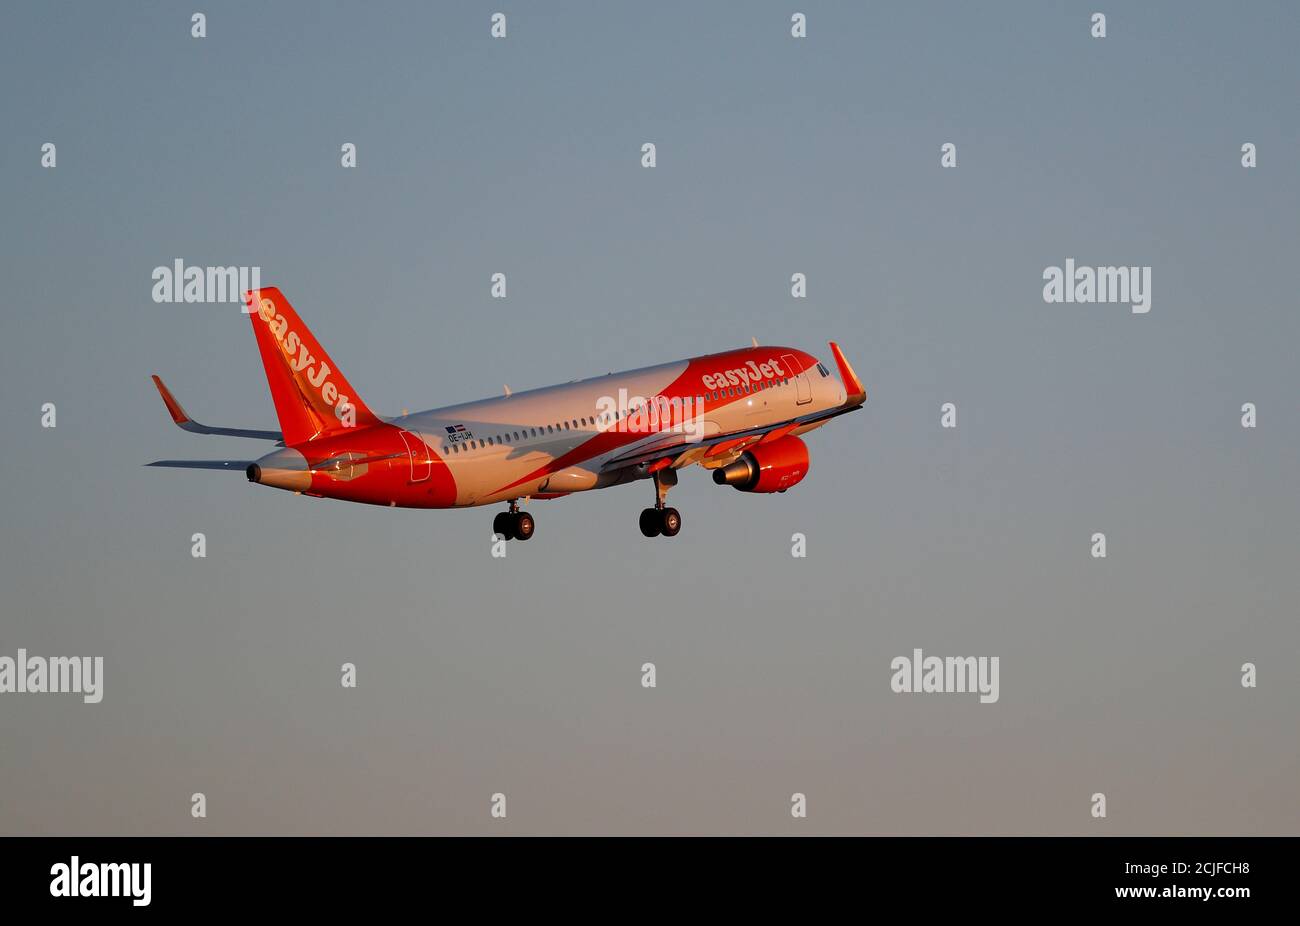 An easyJet Airbus A320-200 airplane takes off from the airport in Palma de Mallorca, Spain, July 29, 2018. Picture taken July 29, 2018.   REUTERS/Paul Hanna Stock Photo